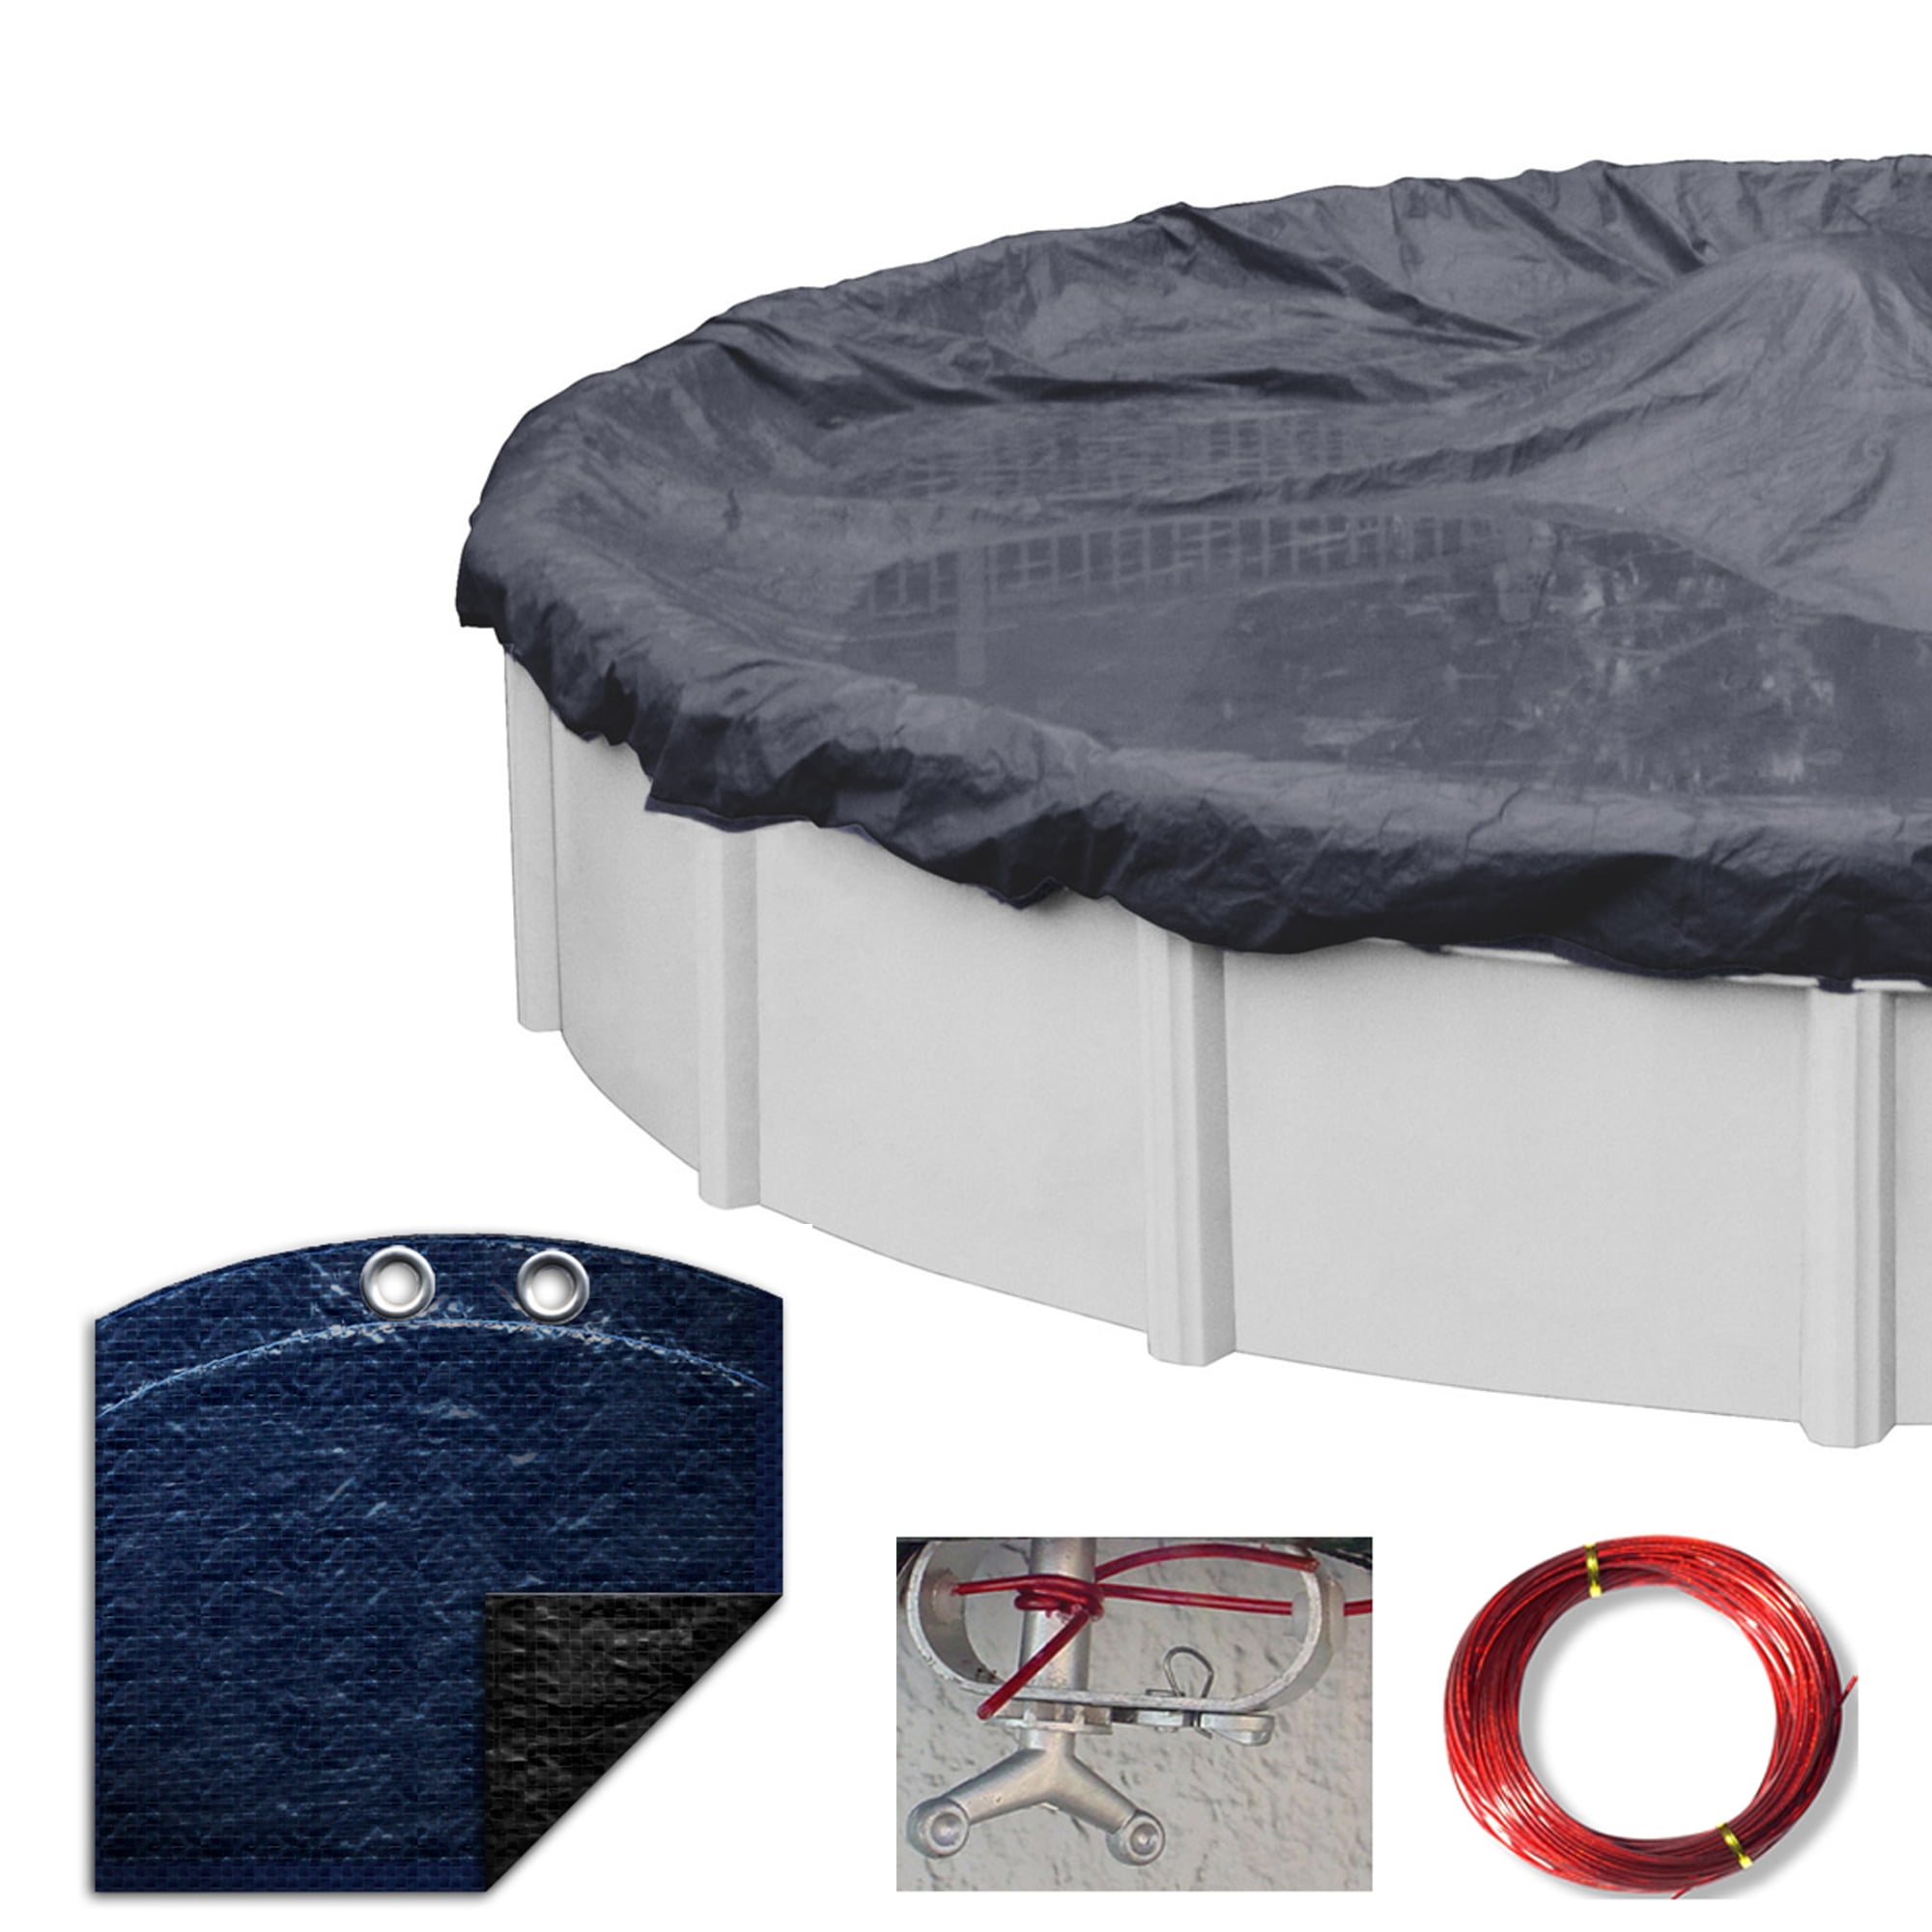 Buffalo Blizzard 30' Round Above Ground Swimming Pool Winter Cover 10 YR WTY 